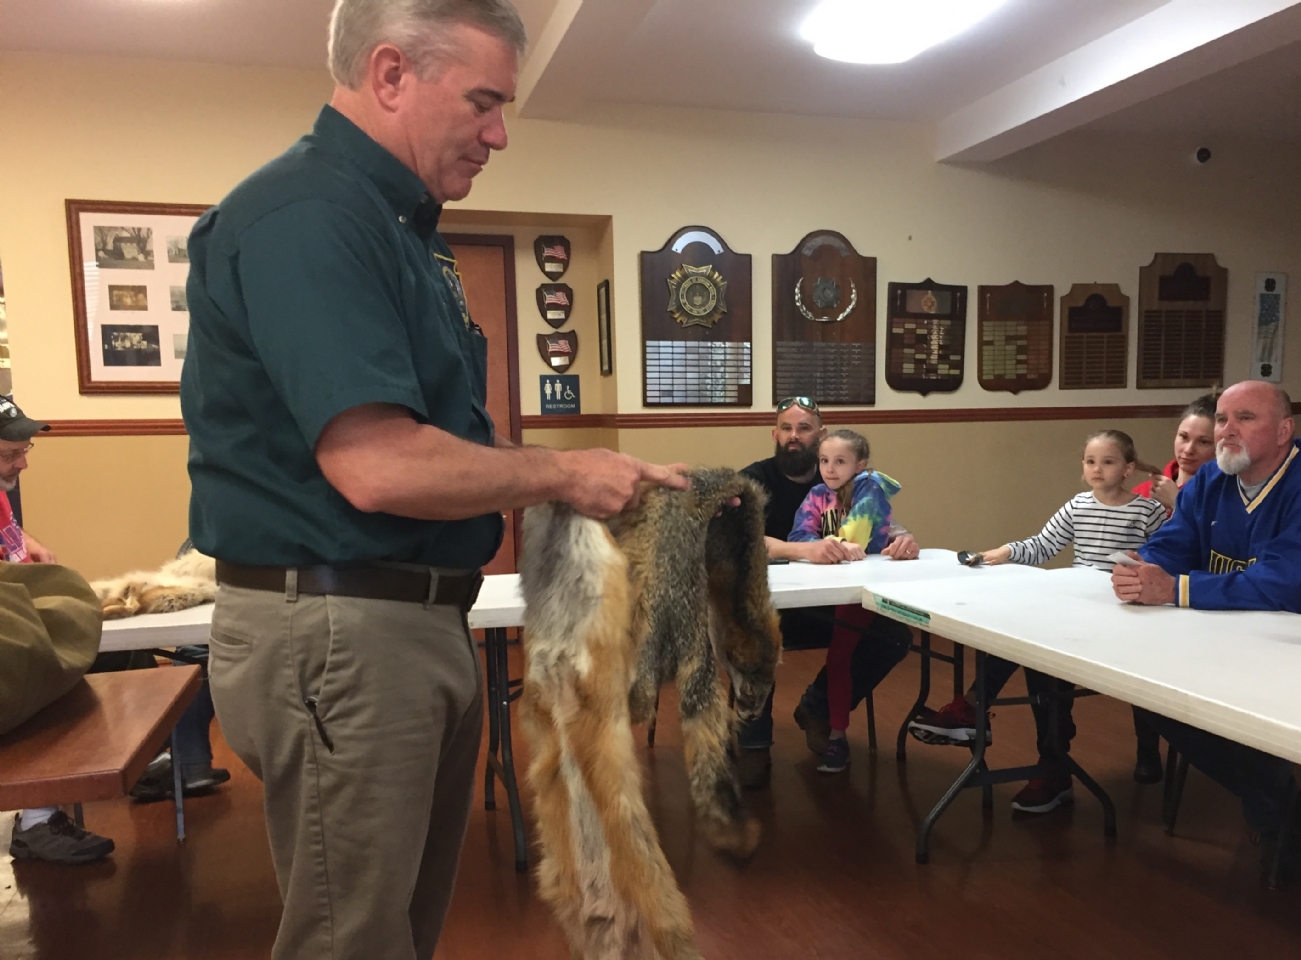 PA Game Commission officer Dan Lynch shows various animal pelts to attendees of Wildlife for Everyone program at Post 845 on 4/28/19.